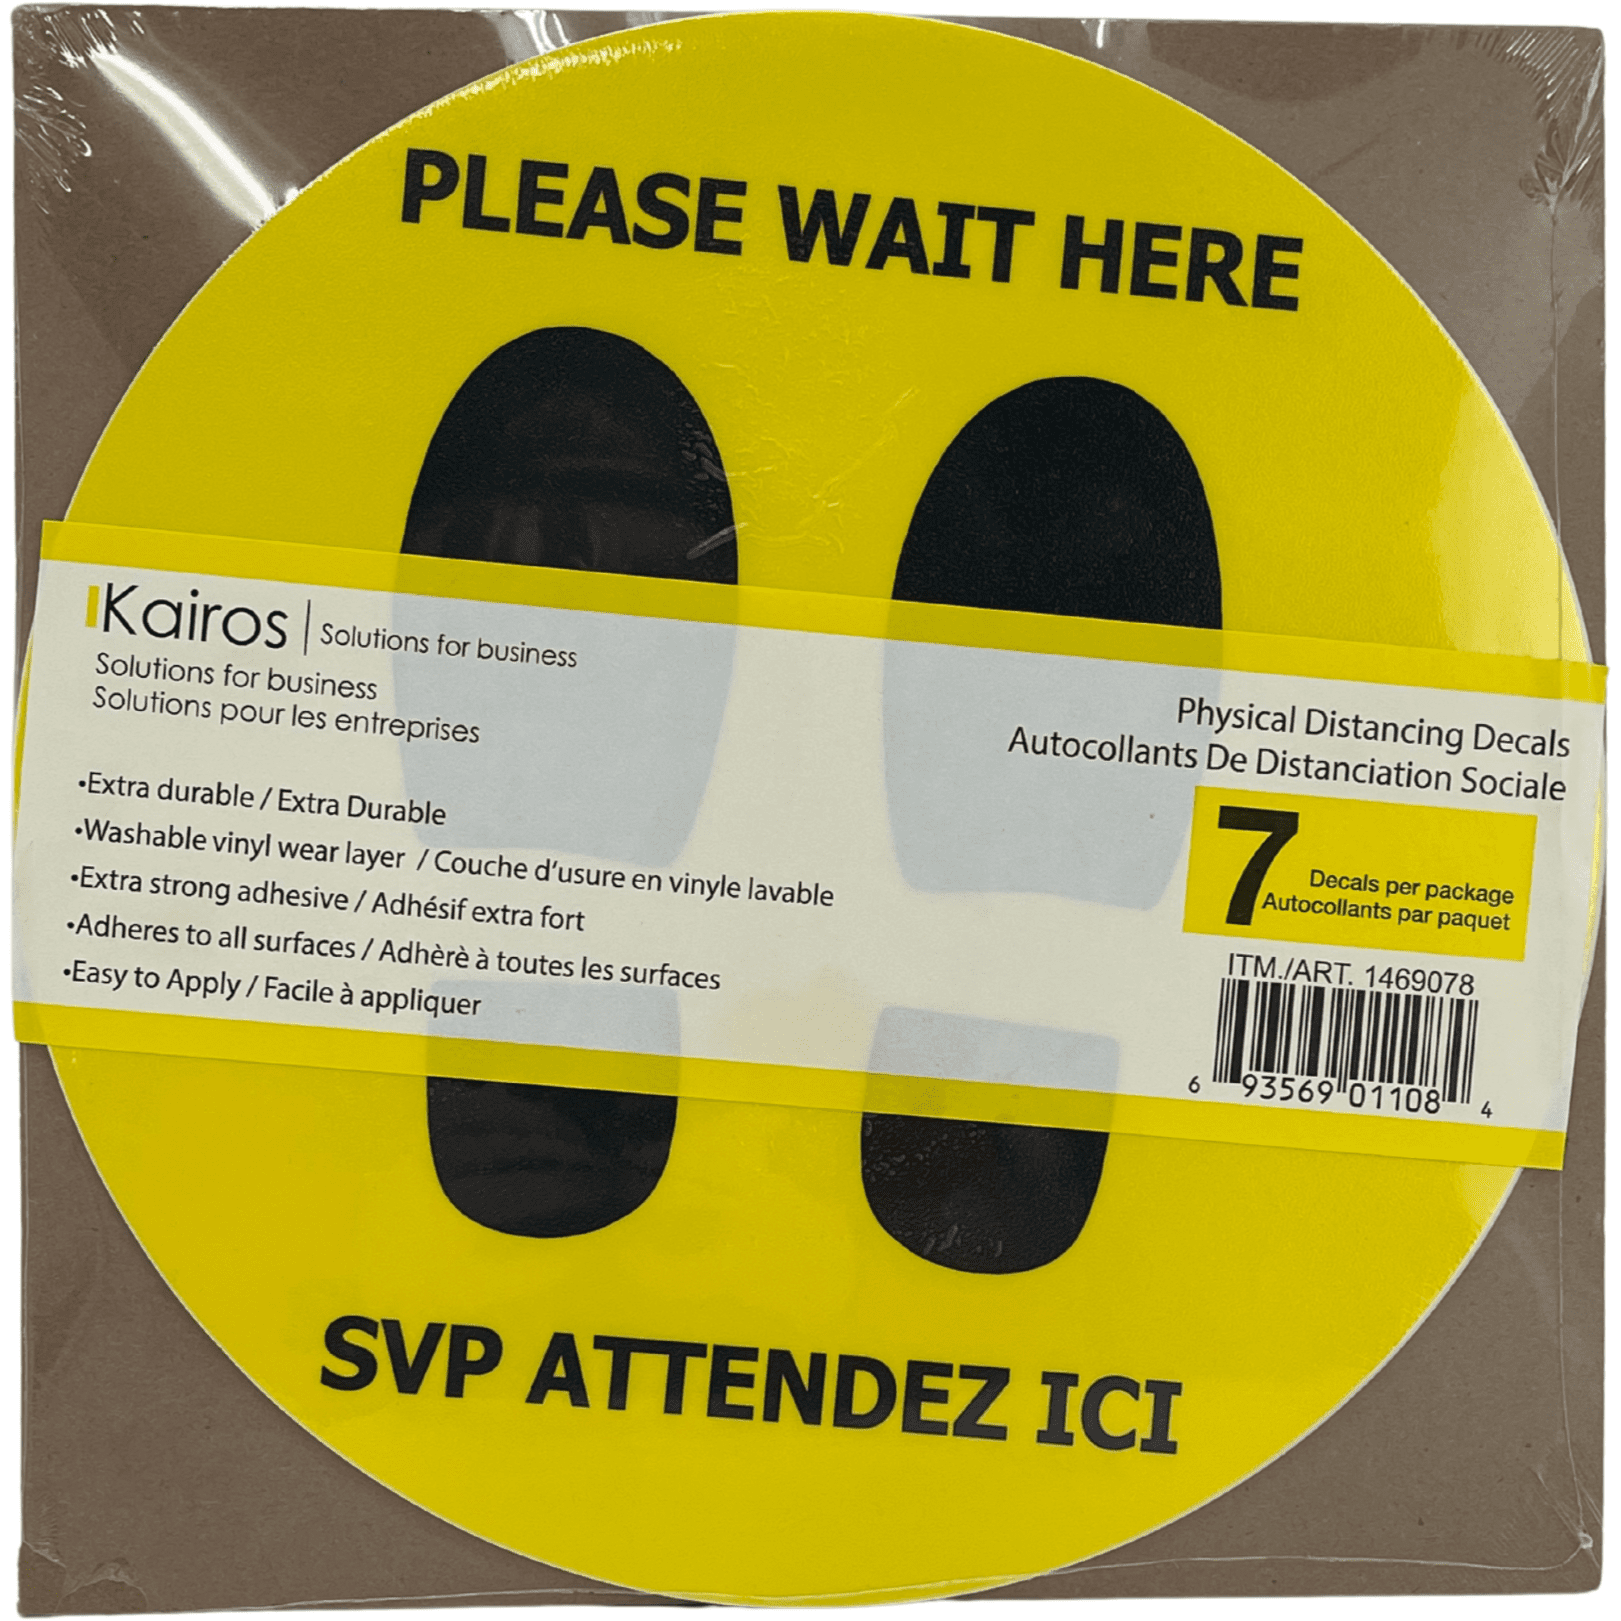 Kairos Physical Distancing Decals / "Please Wait Here" Floor Stickers / English & French / Pack of 7 / Bright Yellow